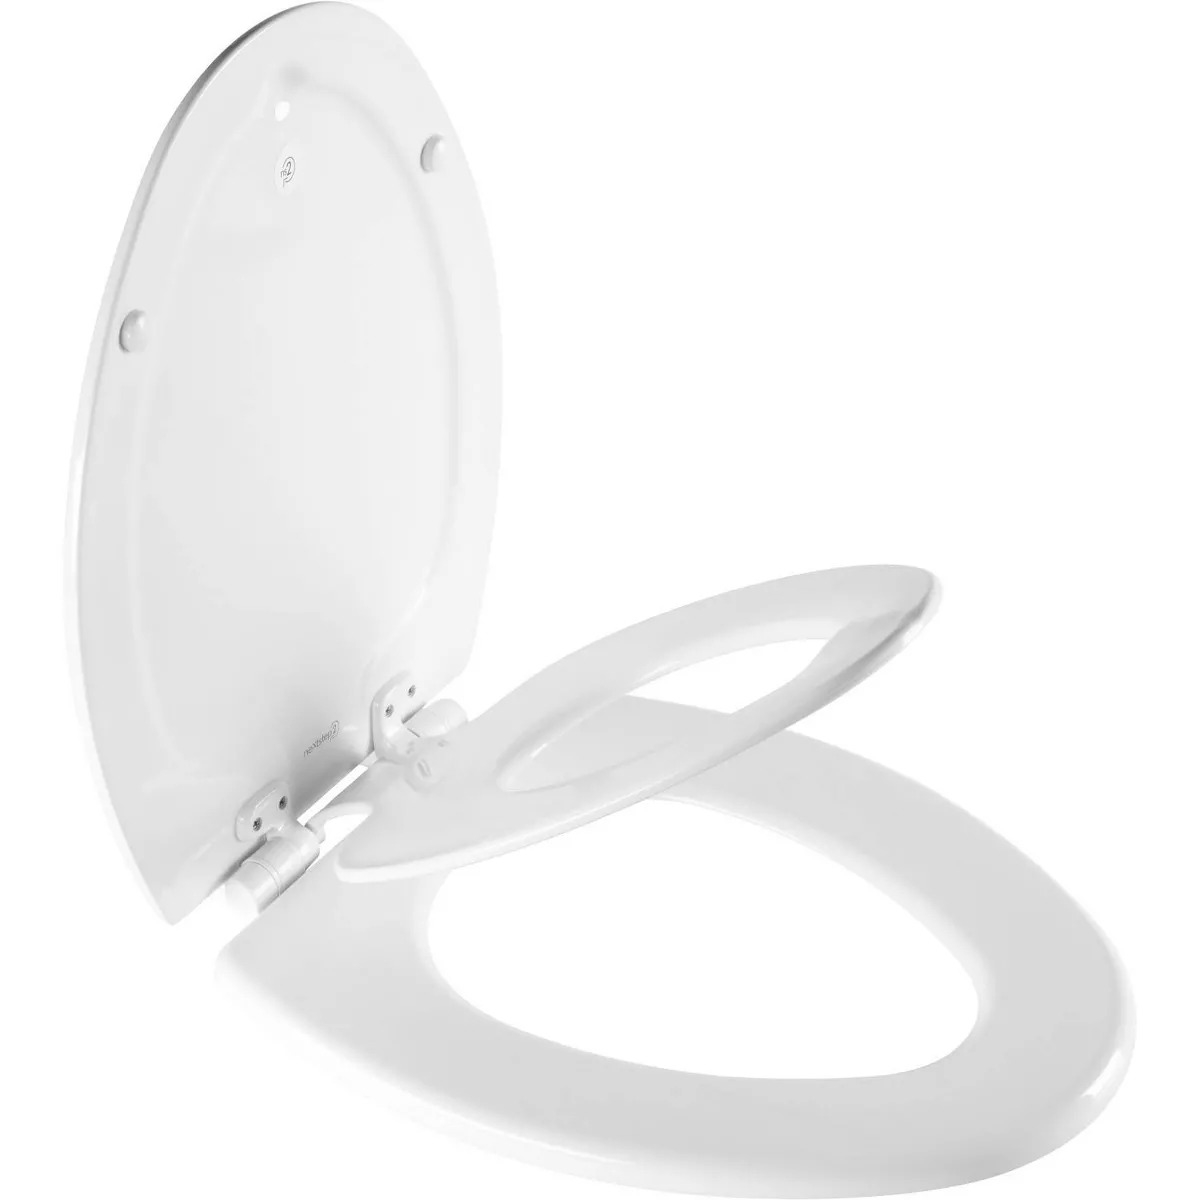 White toilet seat with lid open, positioned slightly angled on a plain background, product display for shopping